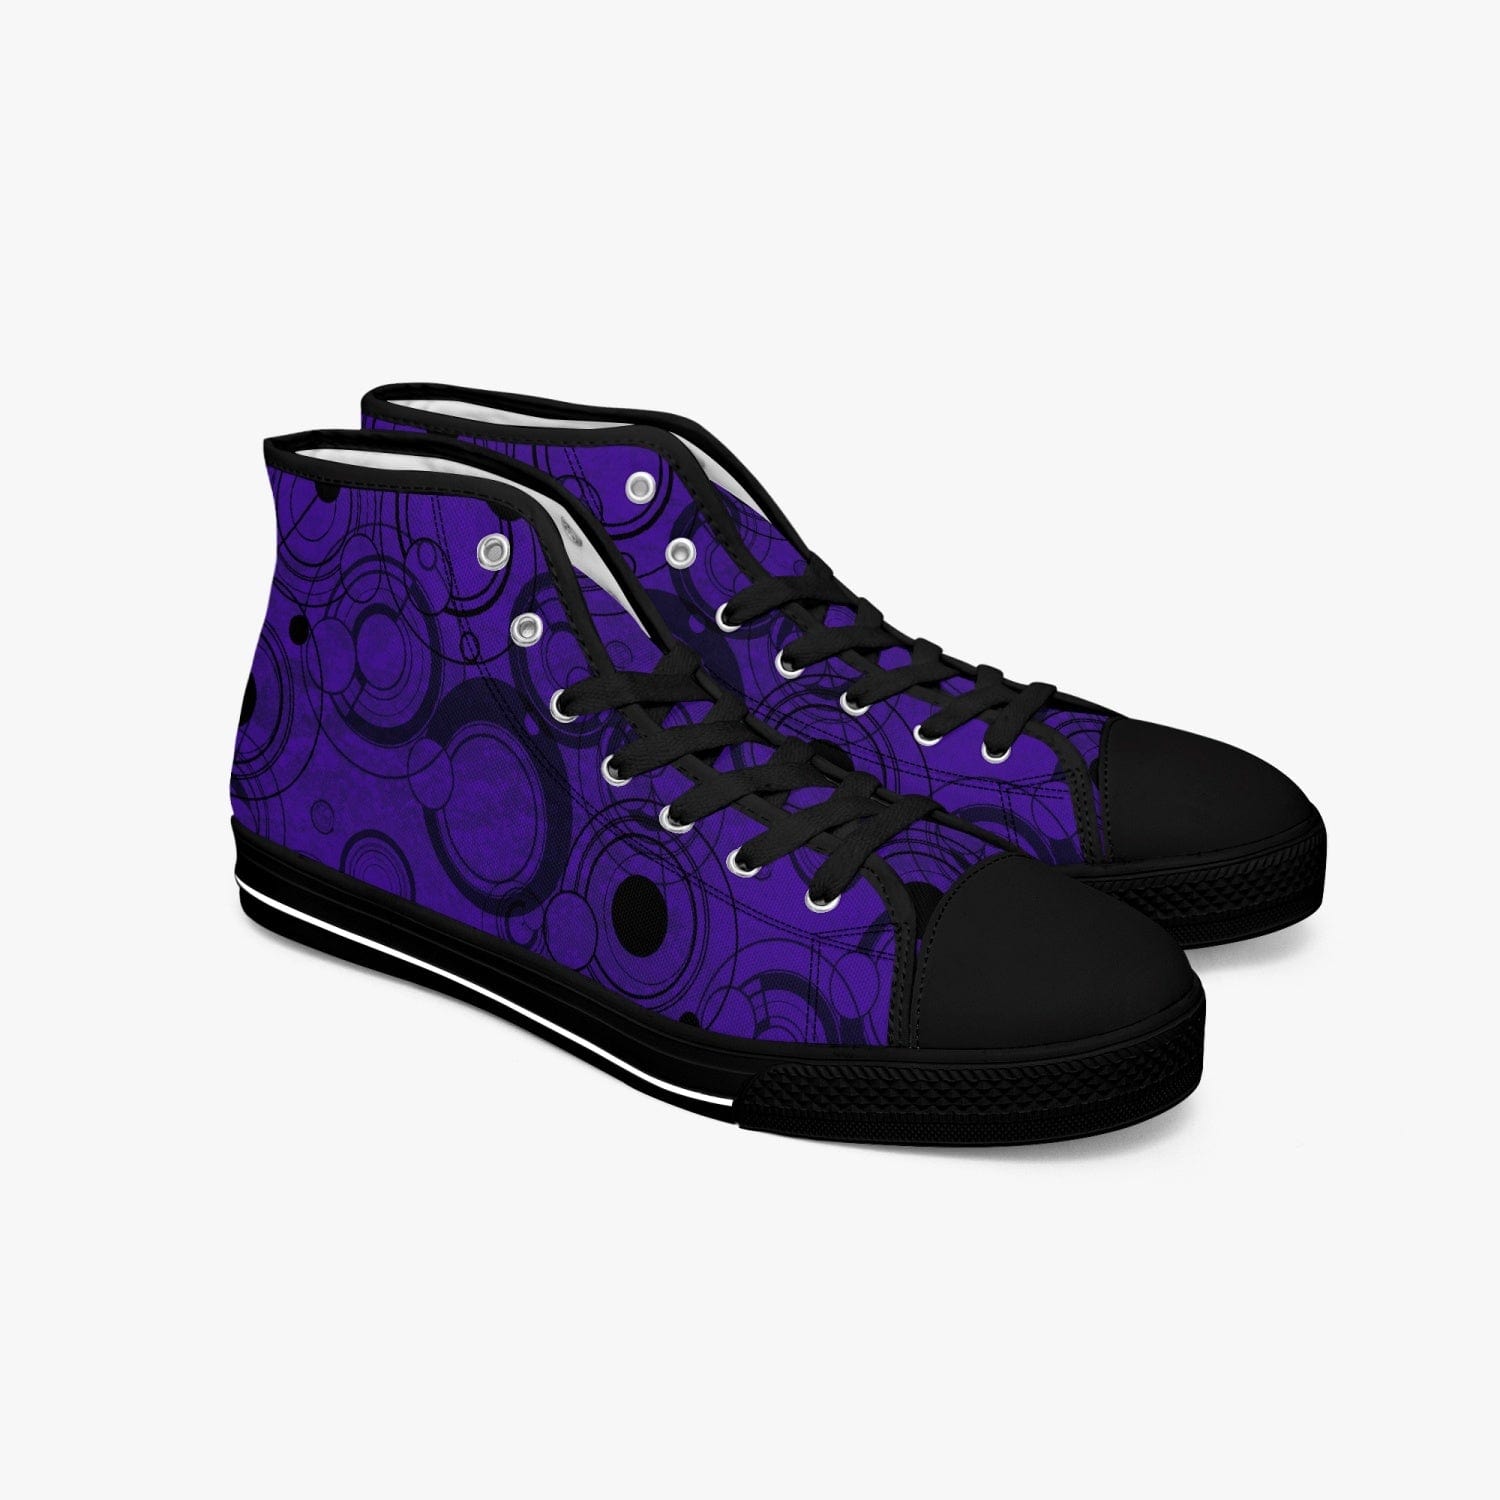 Dr Who Gallifreyan Gallifrey language high top men's sneakers in purple and black at Gallery Serpentine